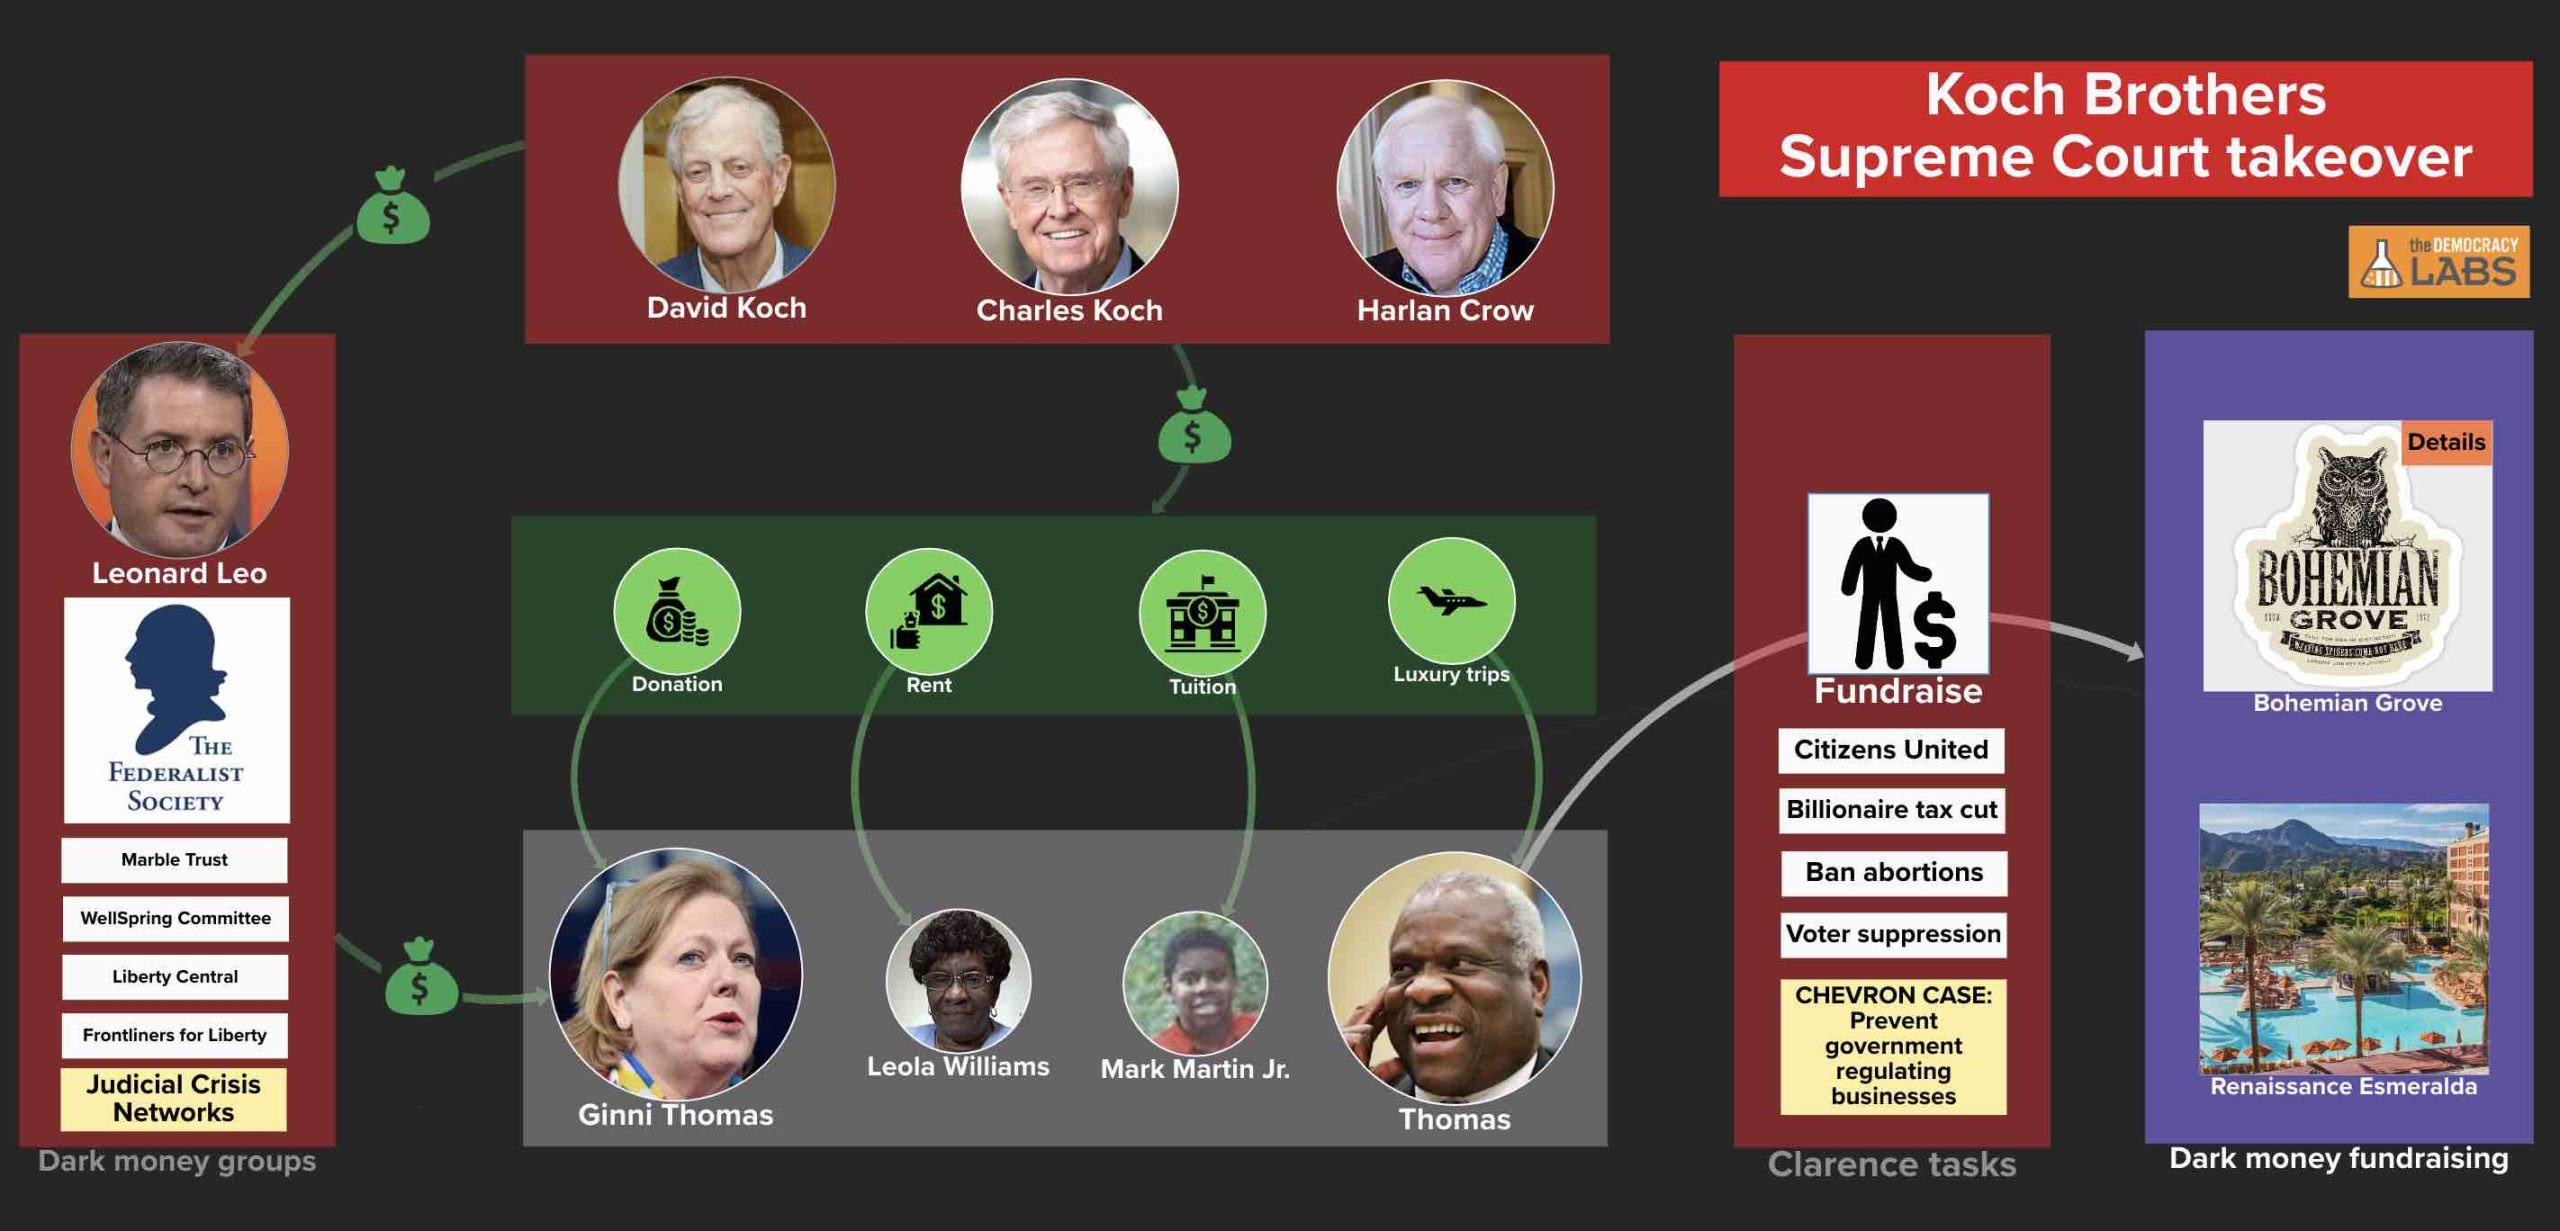 Clarence Thomas relationships with Leonard Leo, Koch Brothers and Harlan Crow.